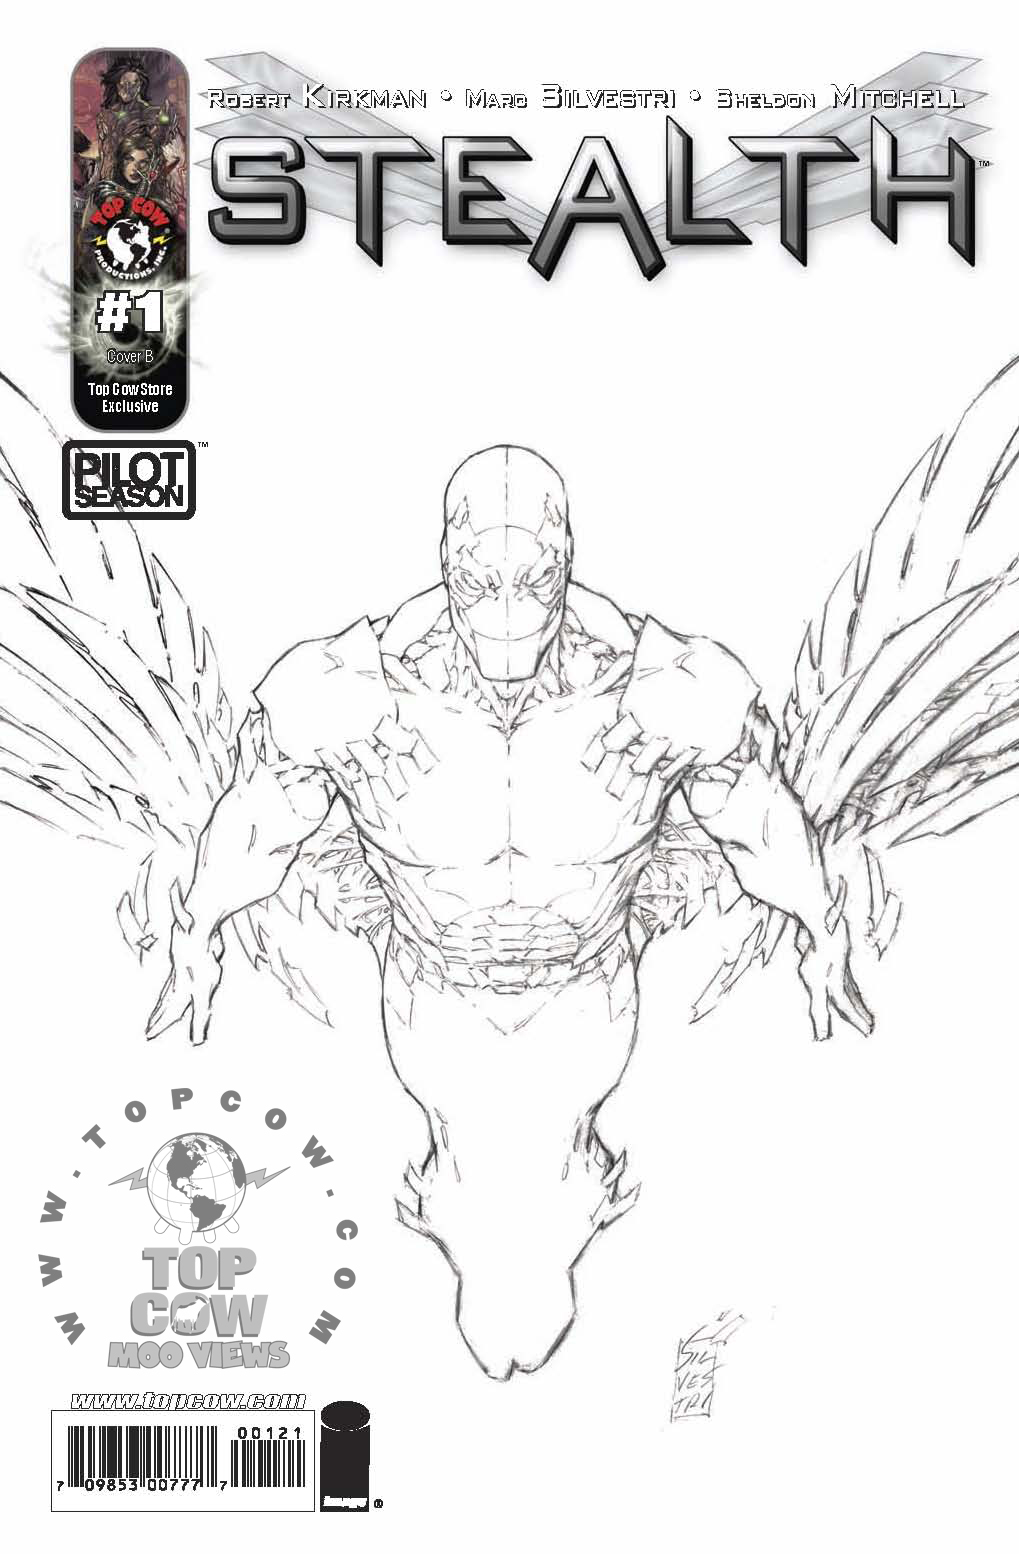 Stealth - Sketch Cover